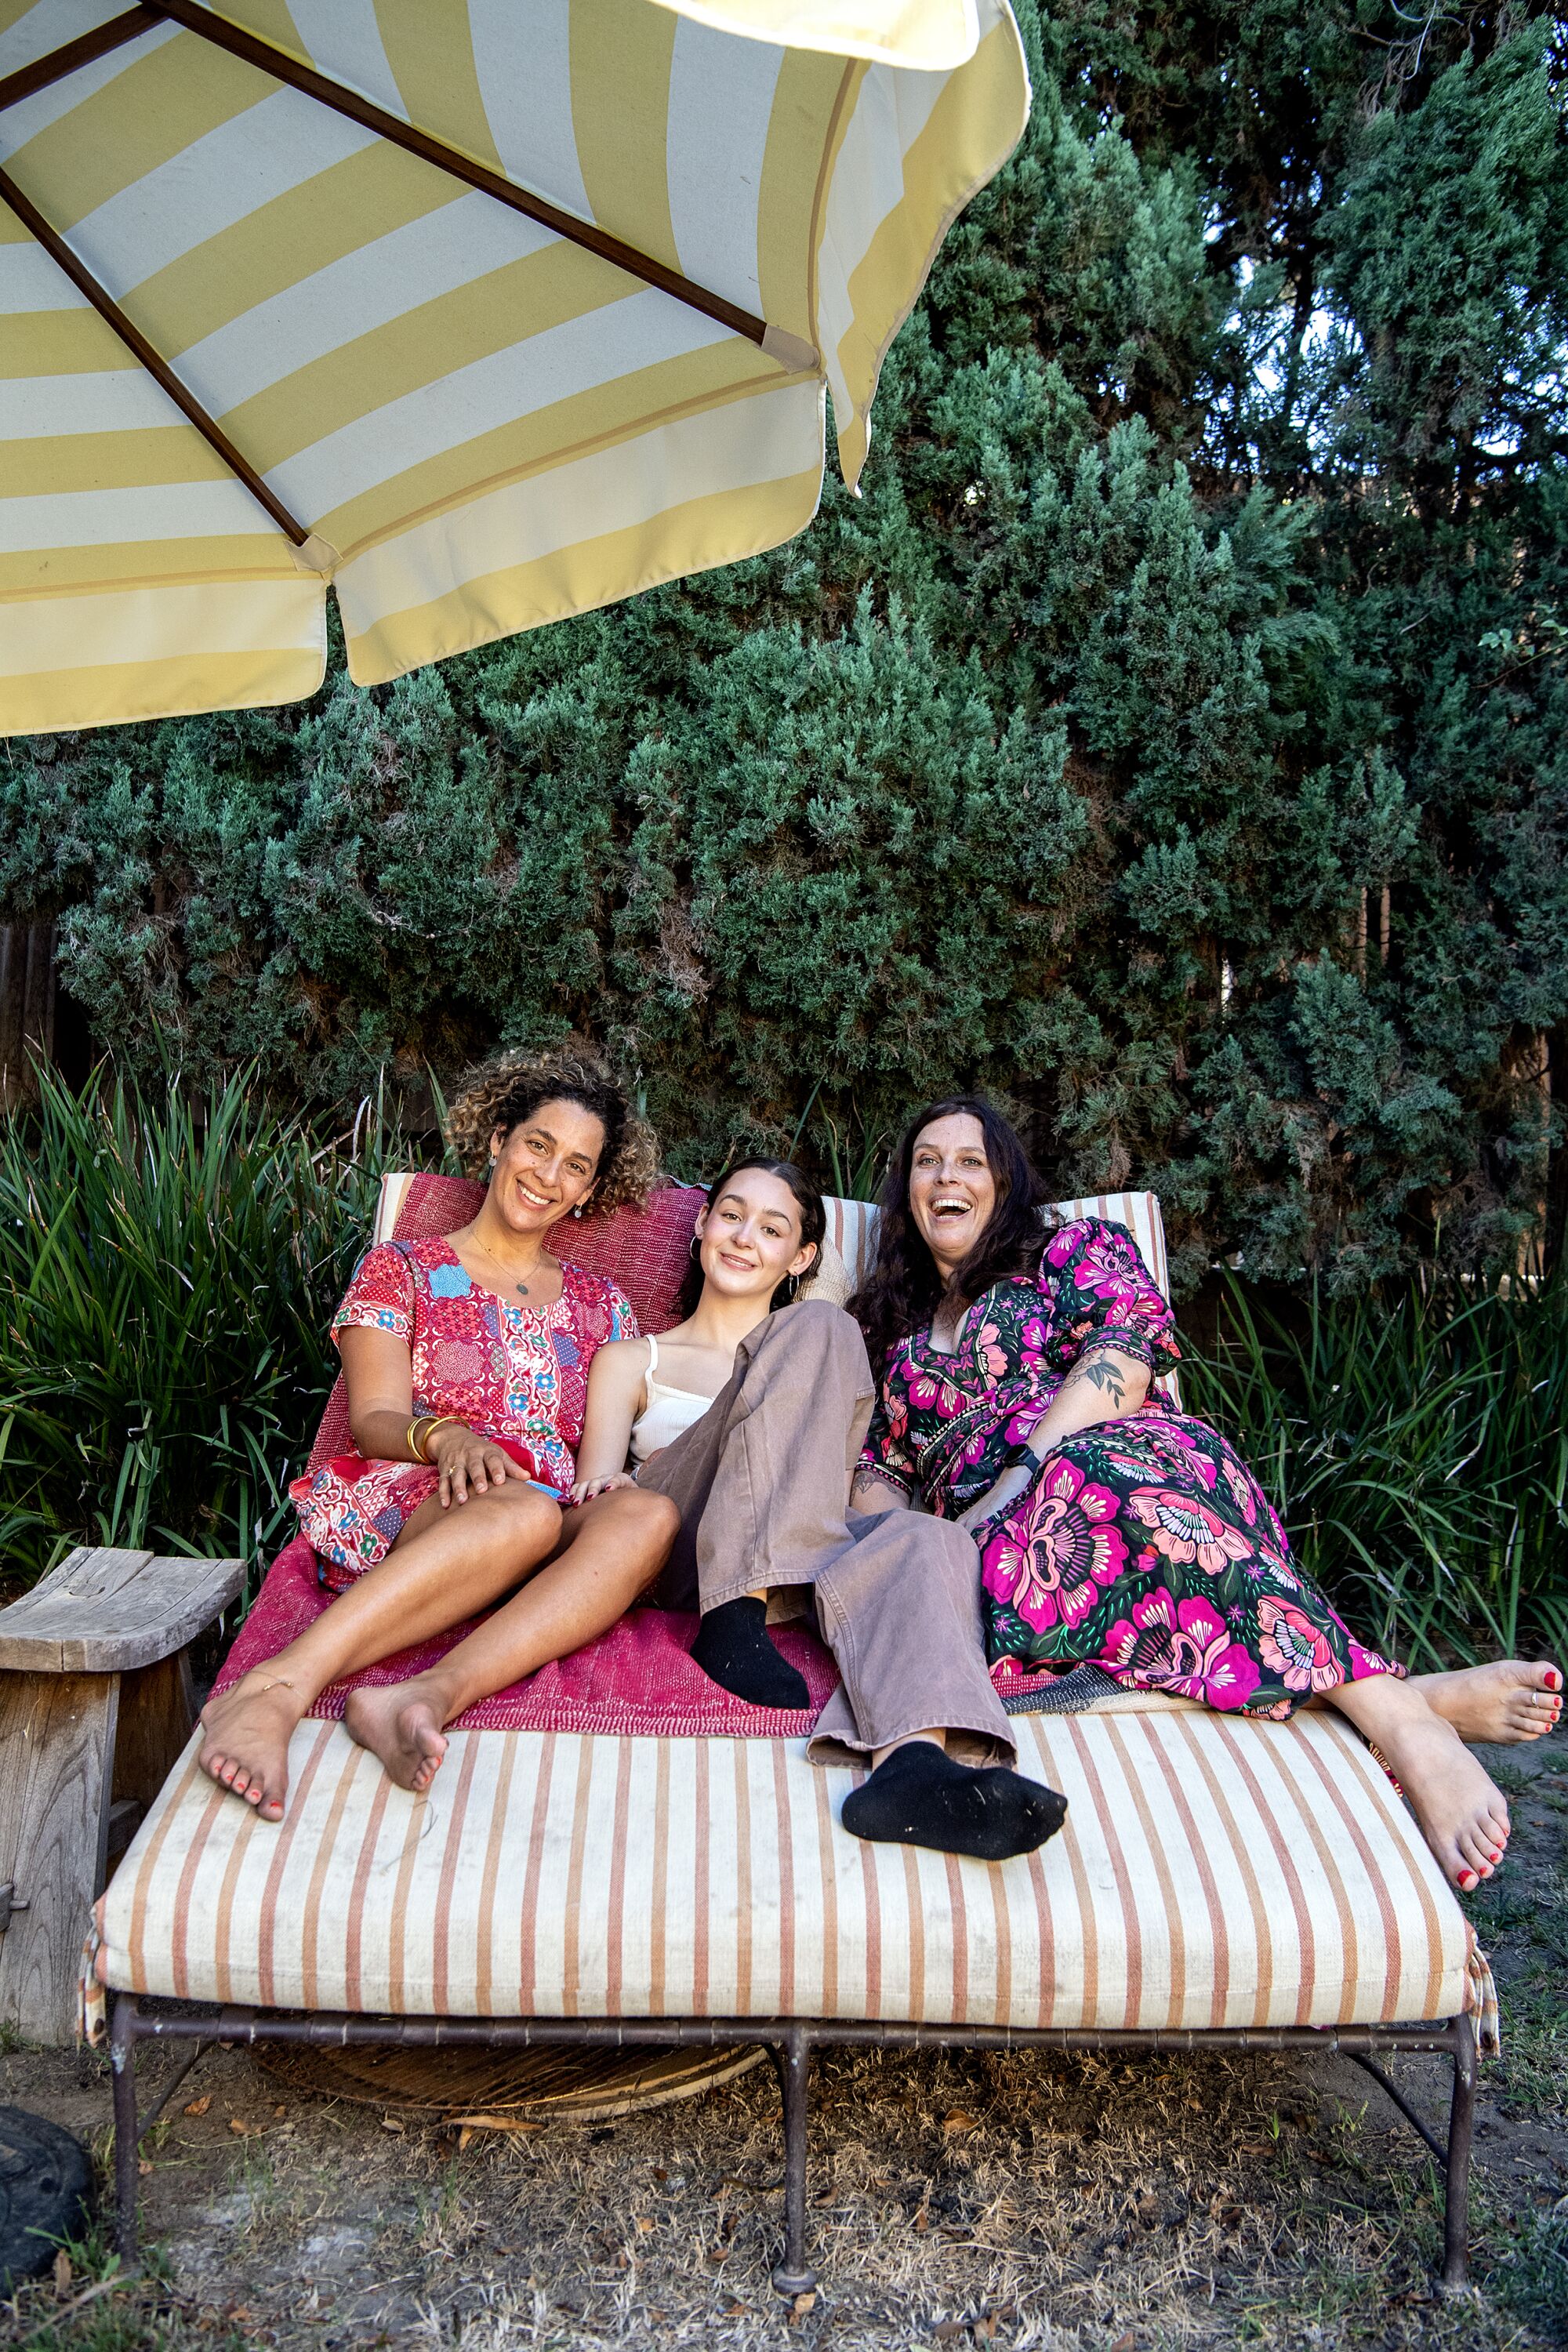 Three women reclining on a lounge chair outside.